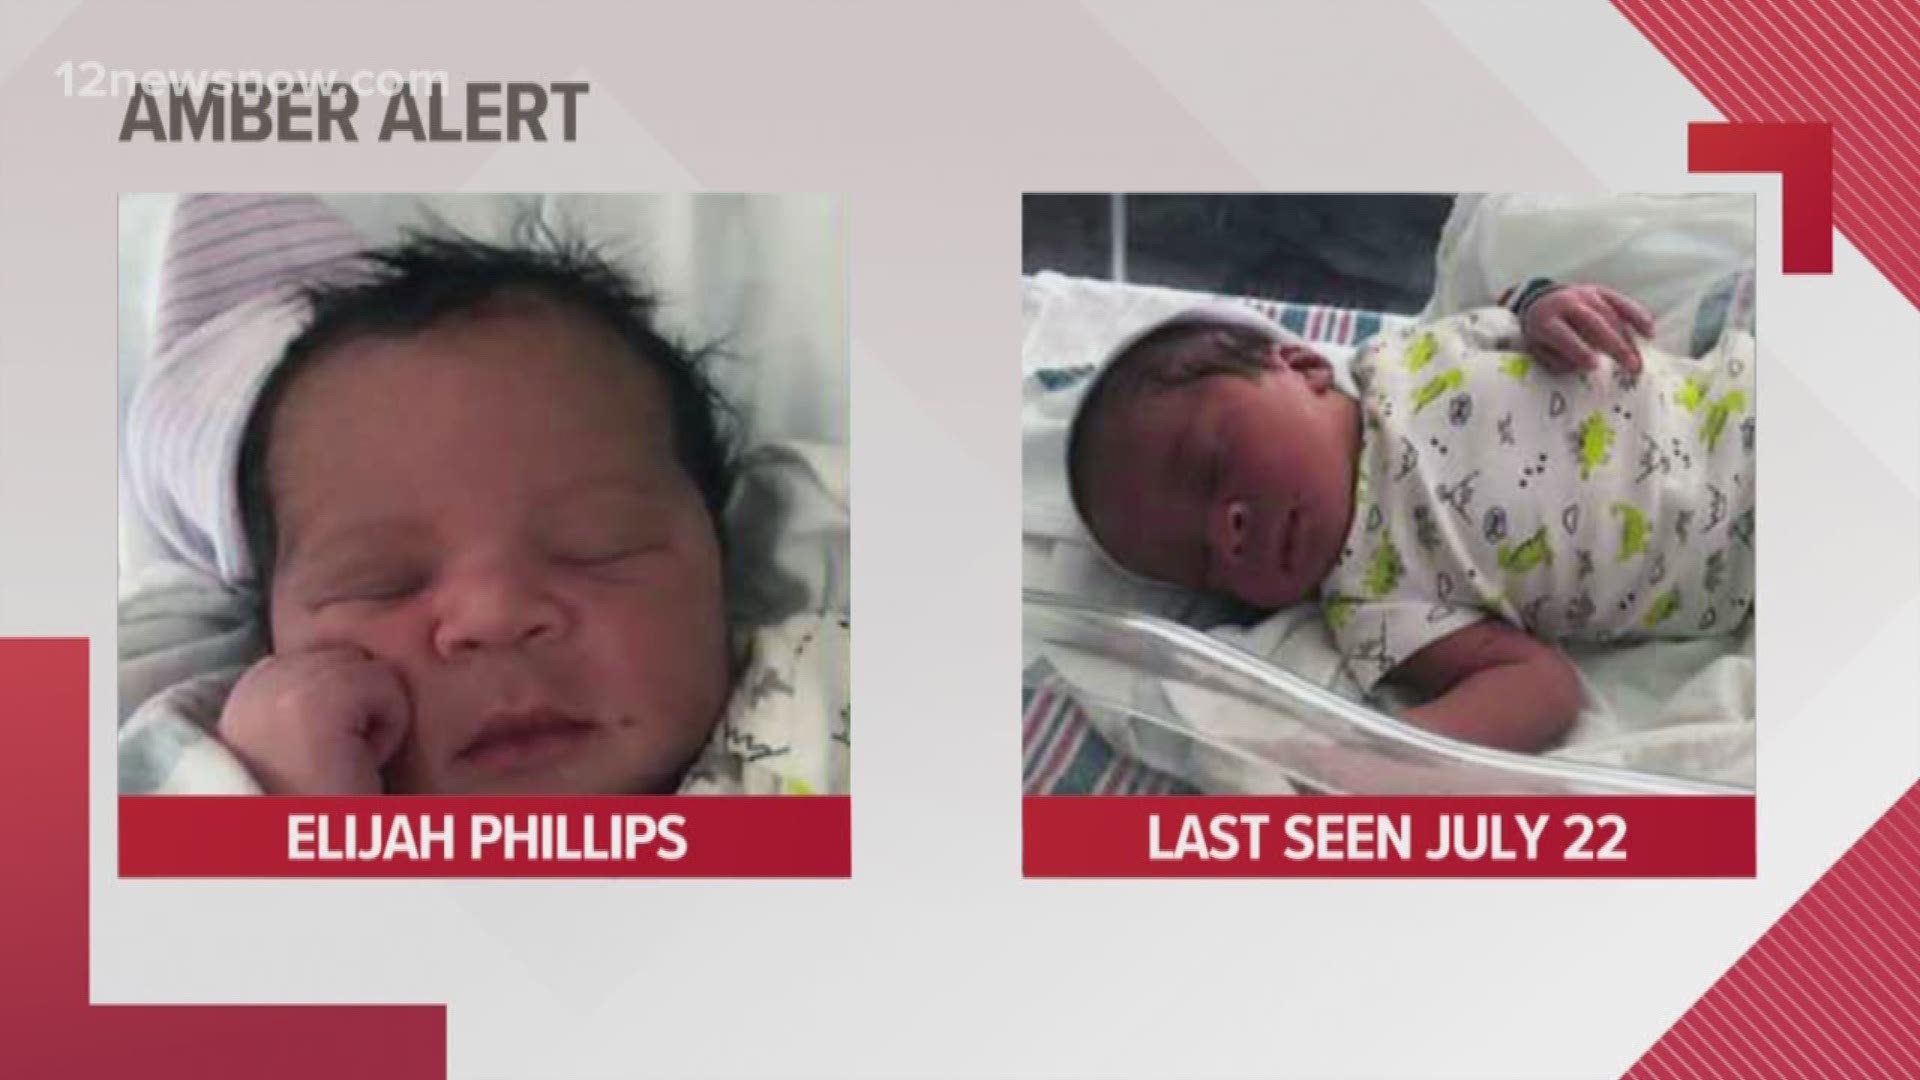 The baby was last seen July 22.